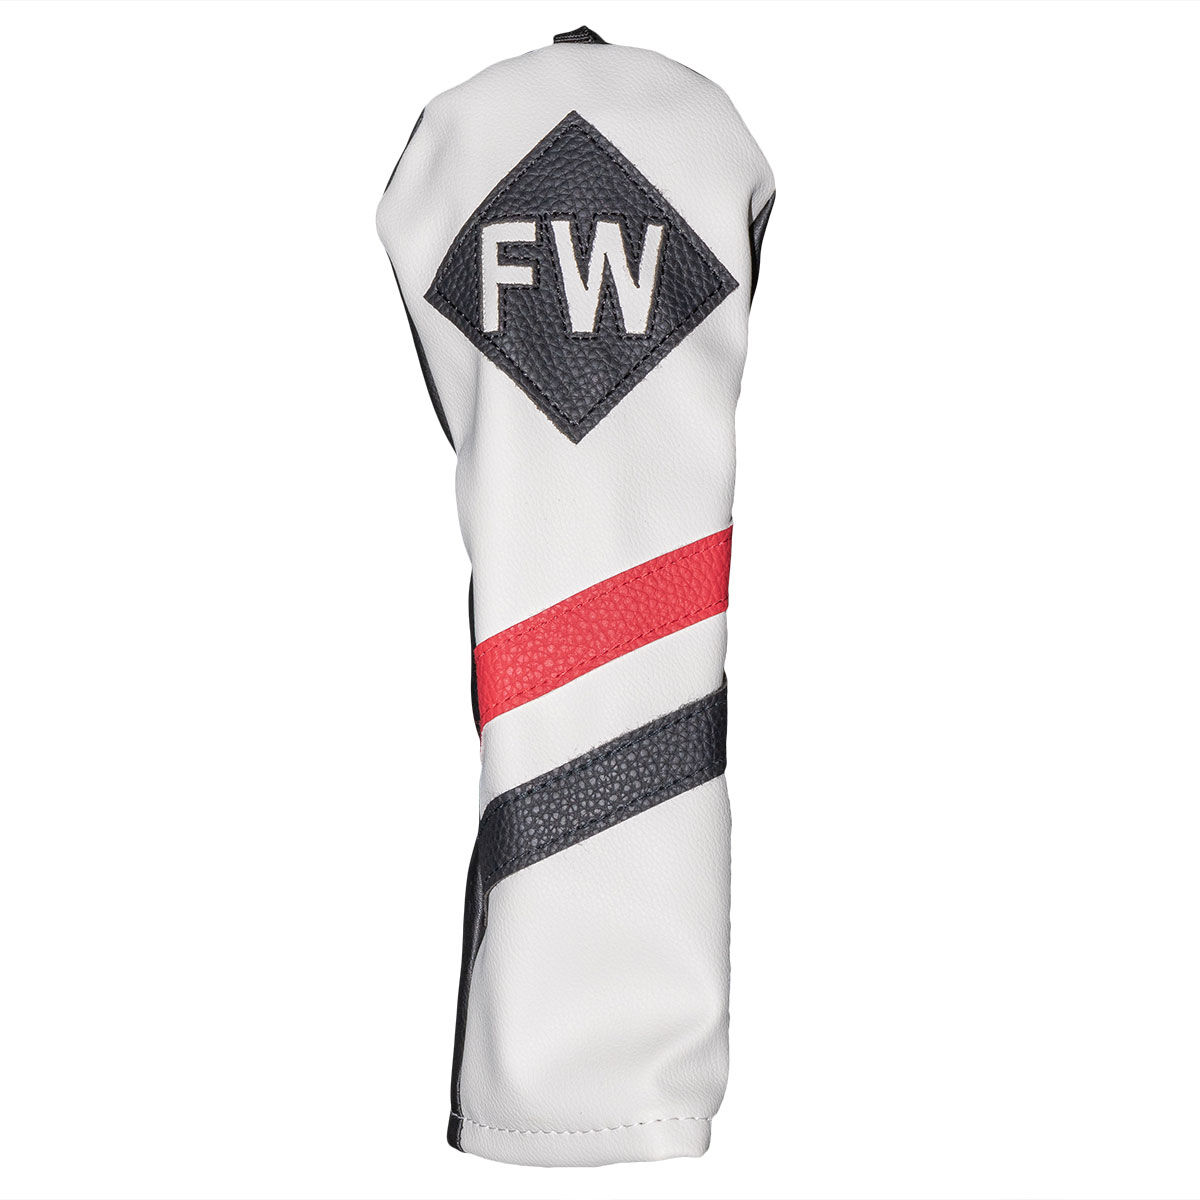 Fazer White, Red and Black Adjustable Vintage Golf Fairway Head Cover, One size | American Golf